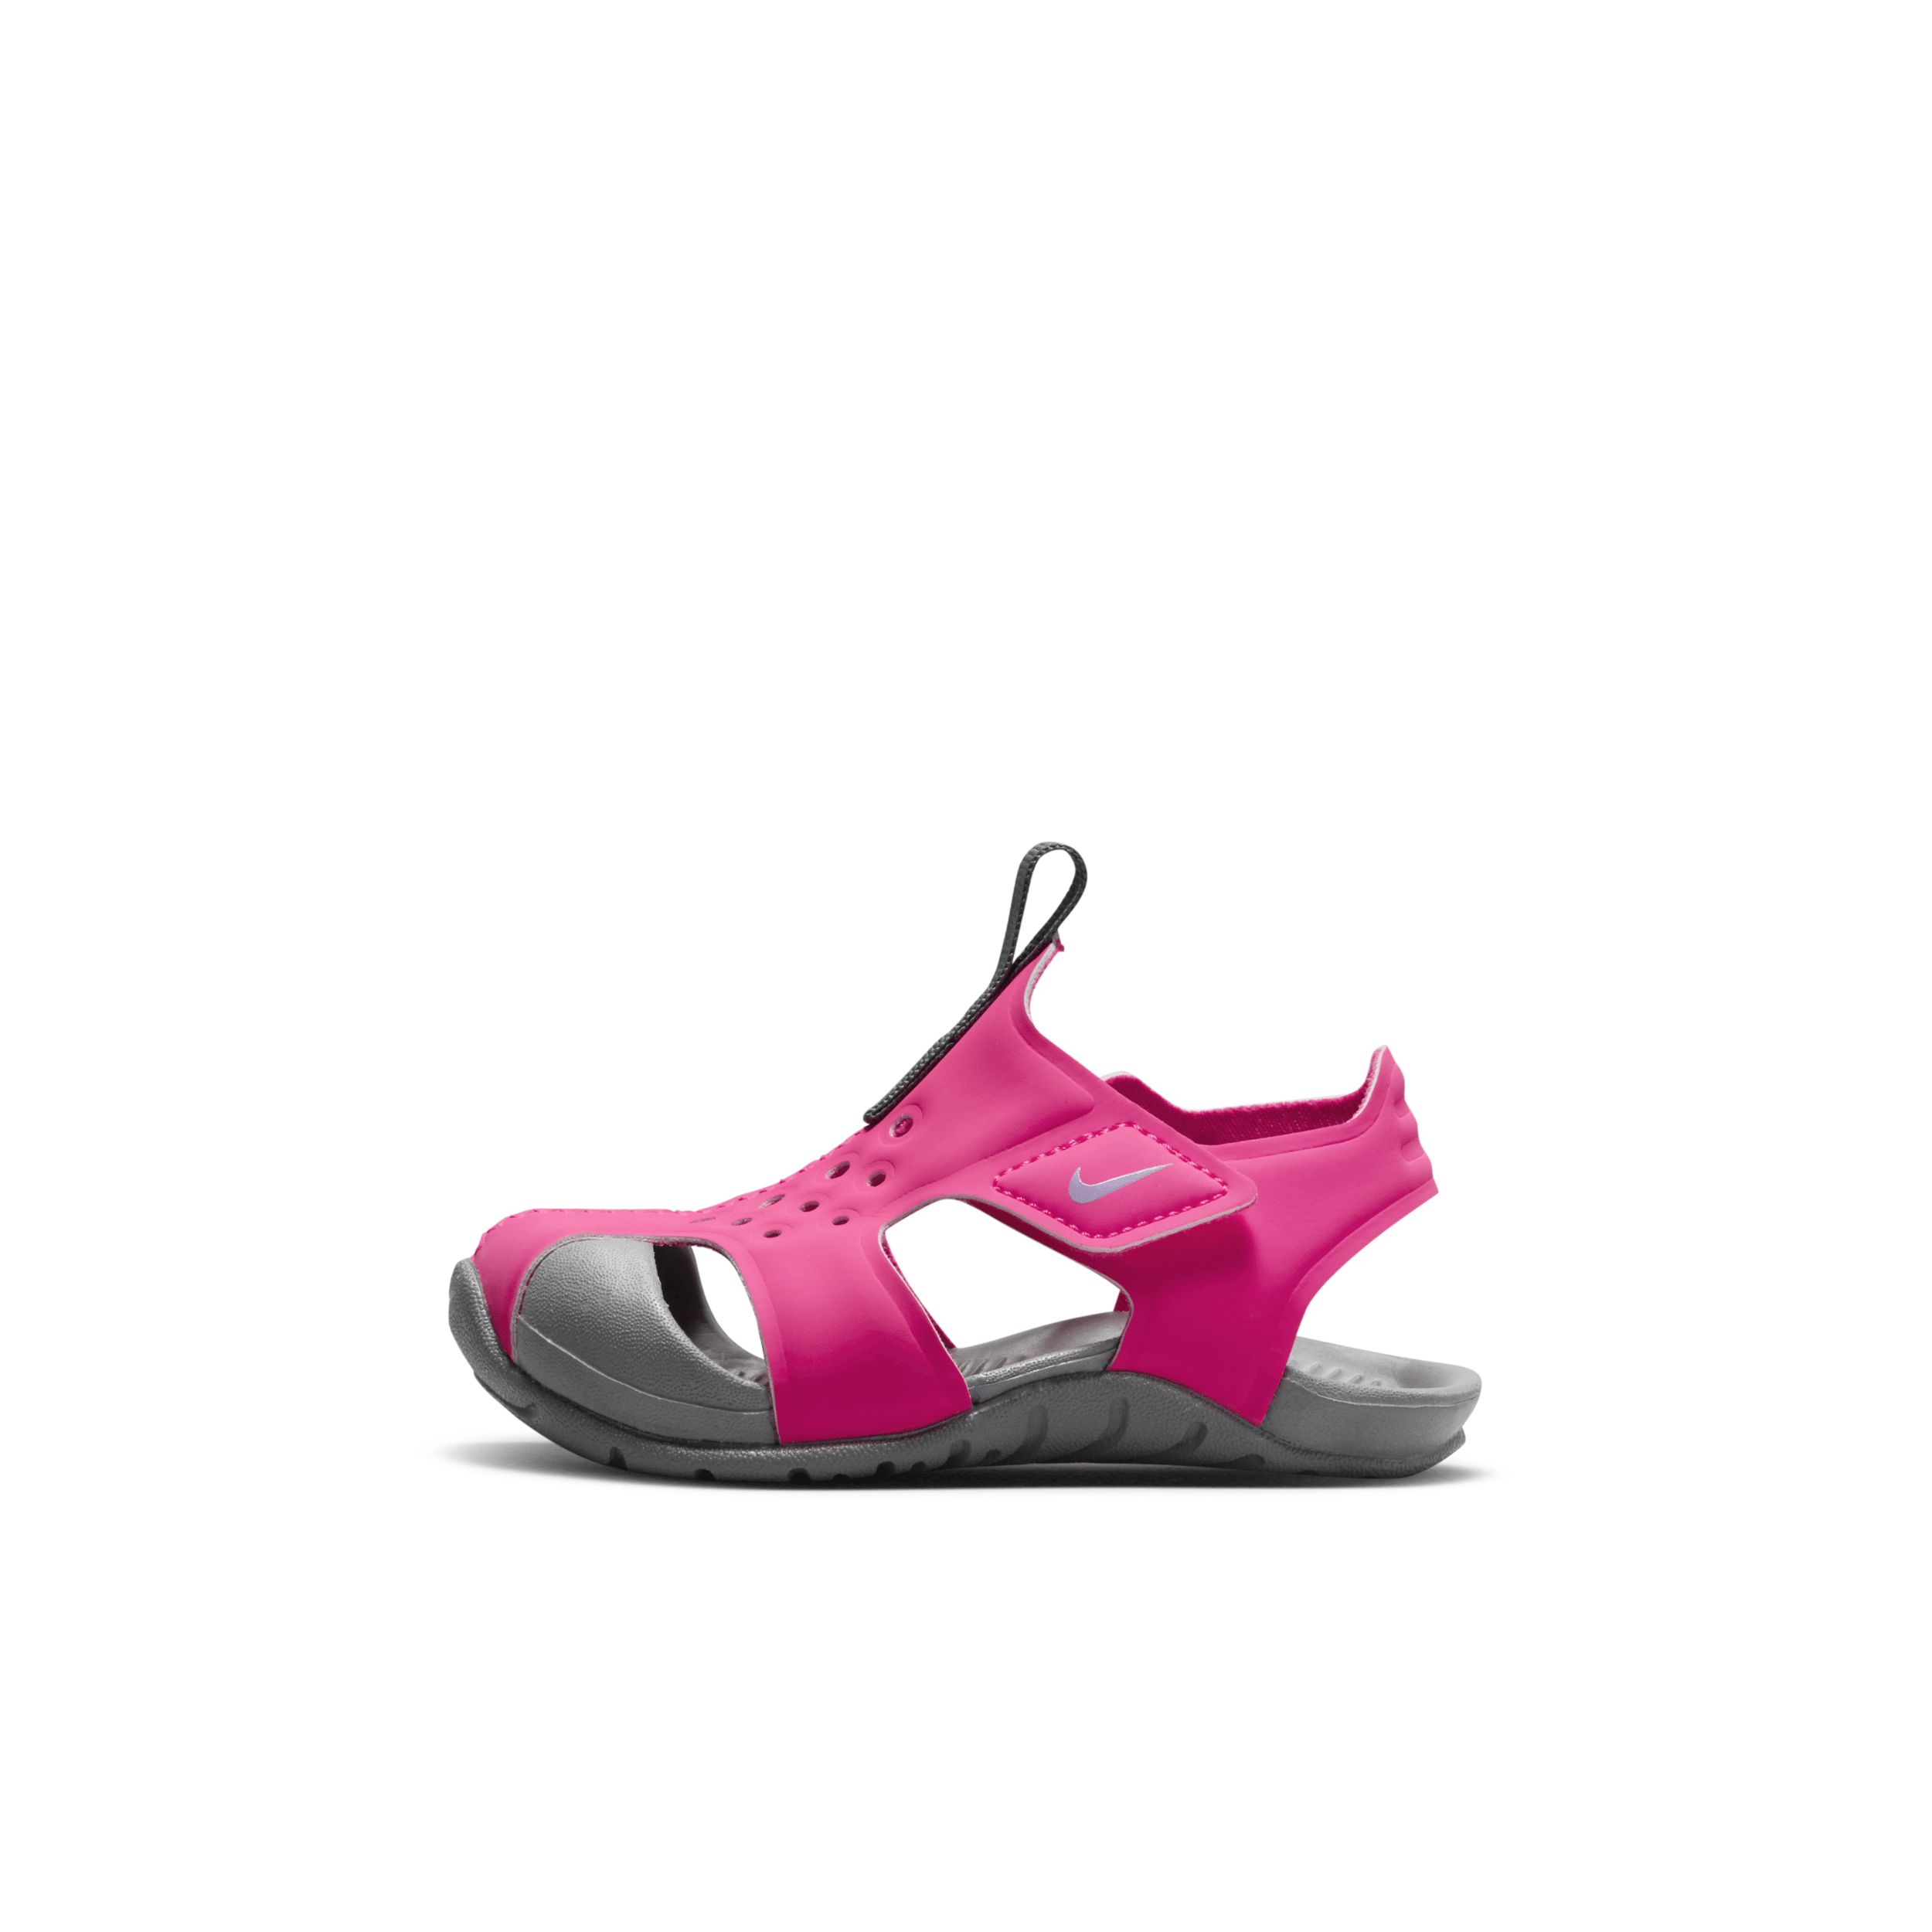 Nike Sunray Protect 2 Baby/Toddler Sandals in Pink, Size: 9C | 943827-605 | Nike (US)